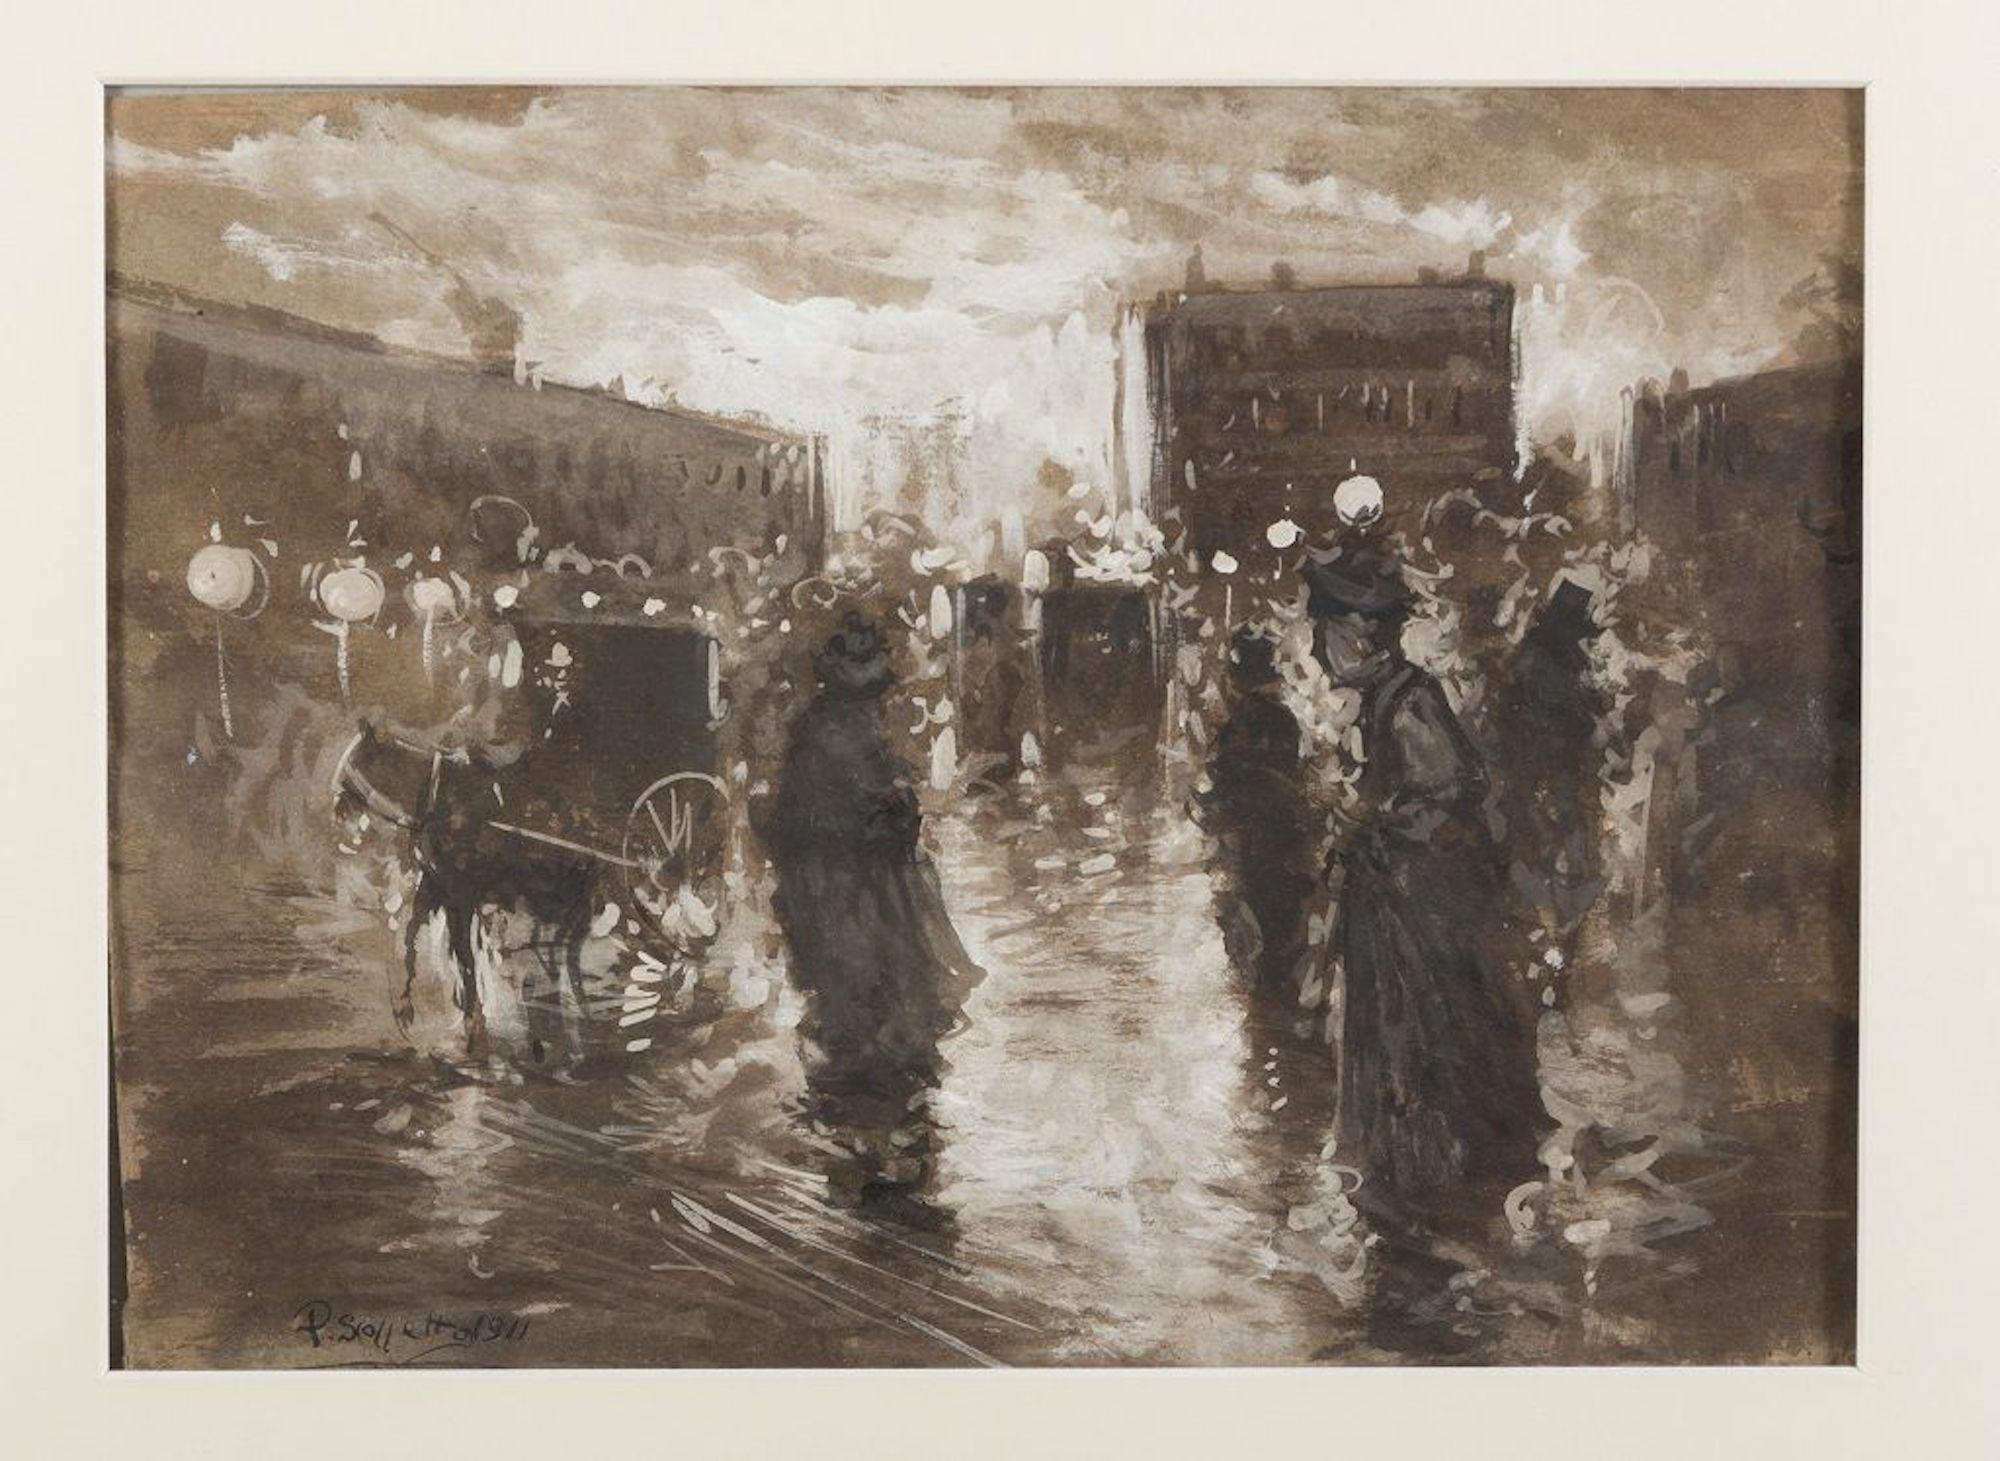 A Night in Paris - Mixed Media on Paper by P. Scoppetta - 1911 - Mixed Media Art by Pietro Scoppetta